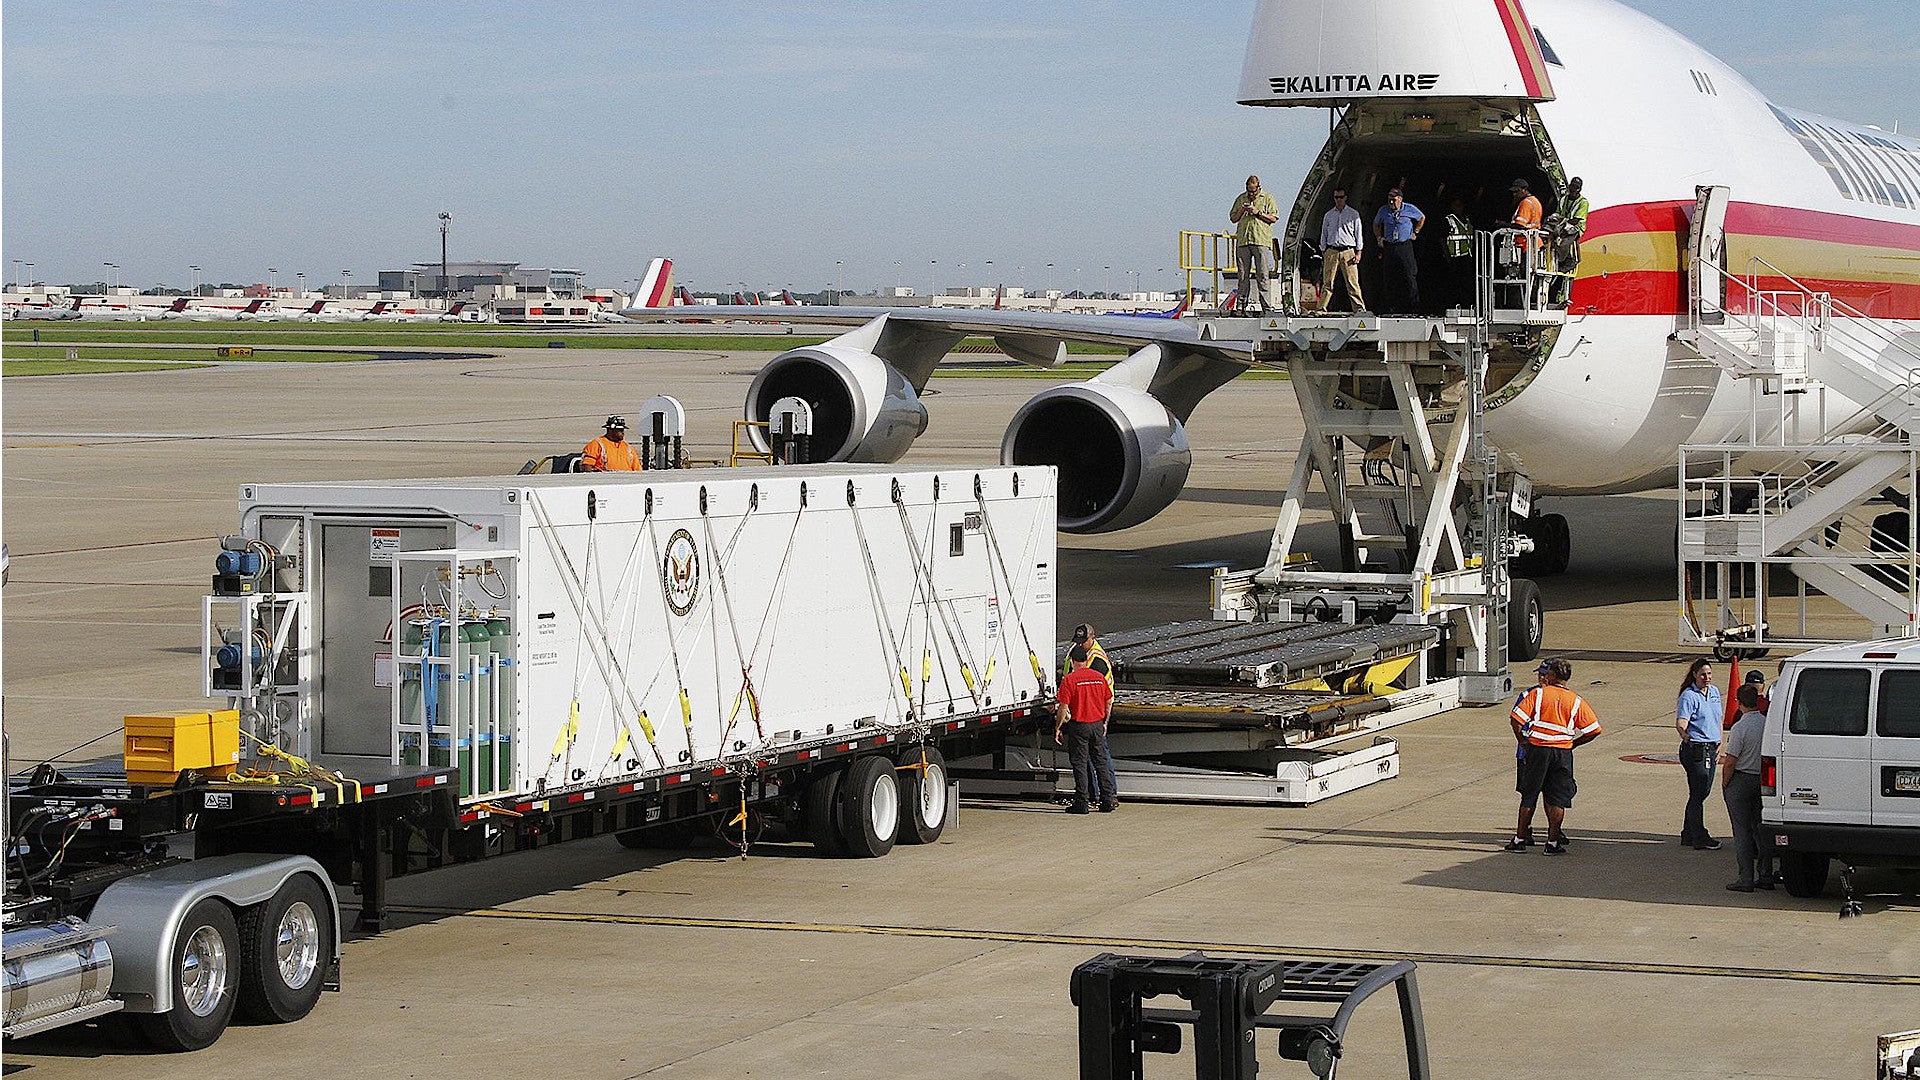 747s Carrying Americans Exposed To Coronavirus Used New Quarantine Box For Infected Flyers